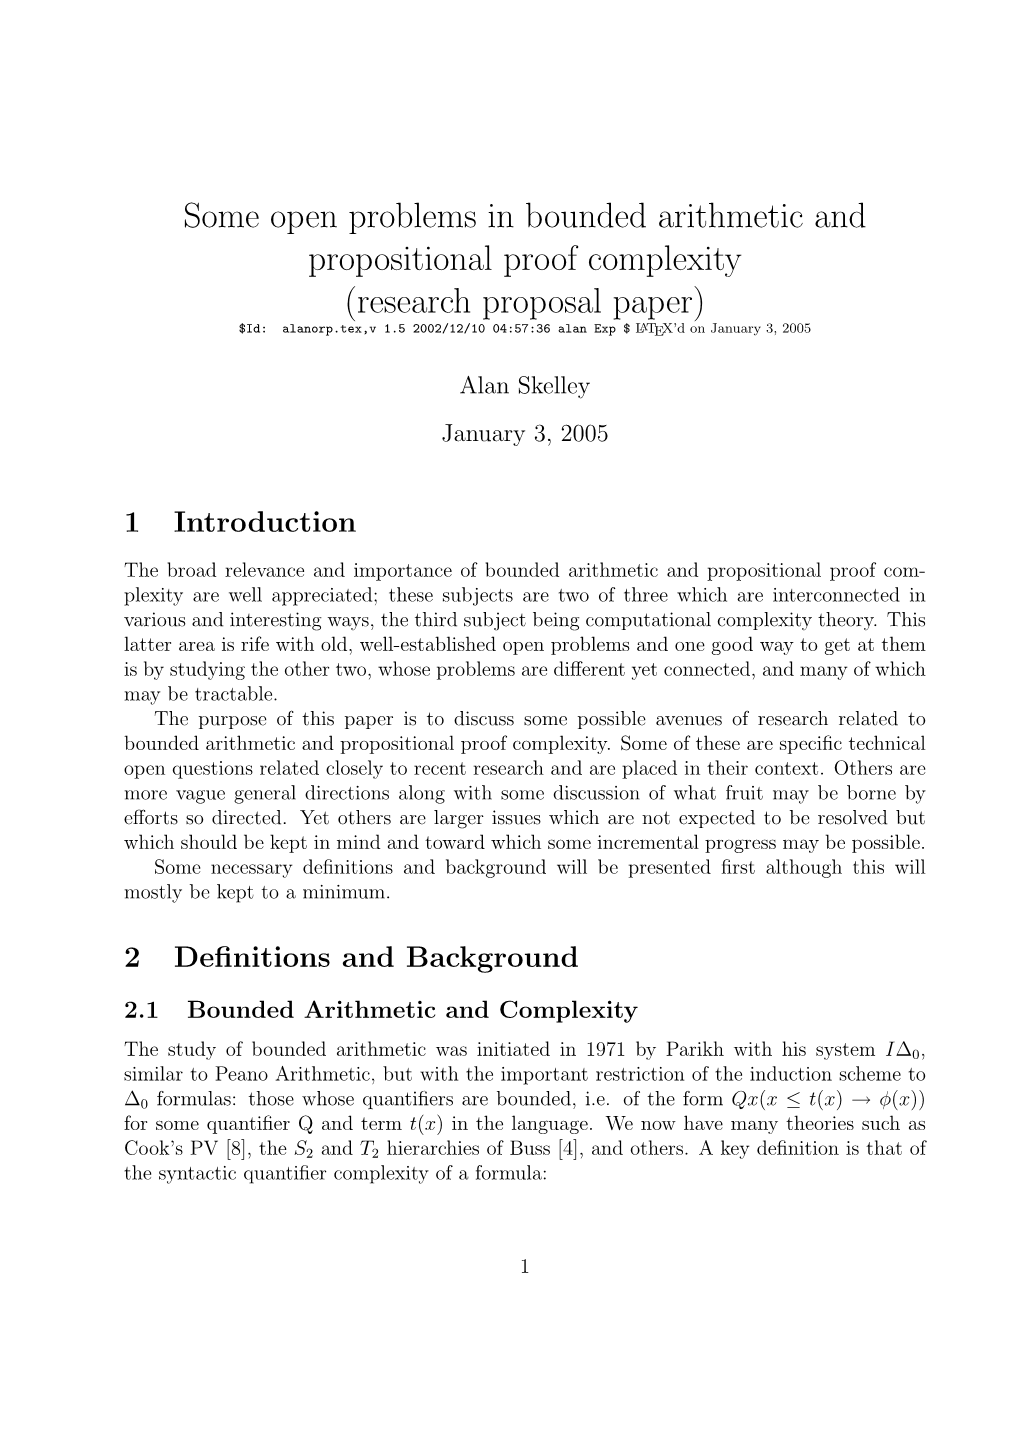 Some Open Problems in Bounded Arithmetic and Propositional Proof Complexity (Research Proposal Paper)